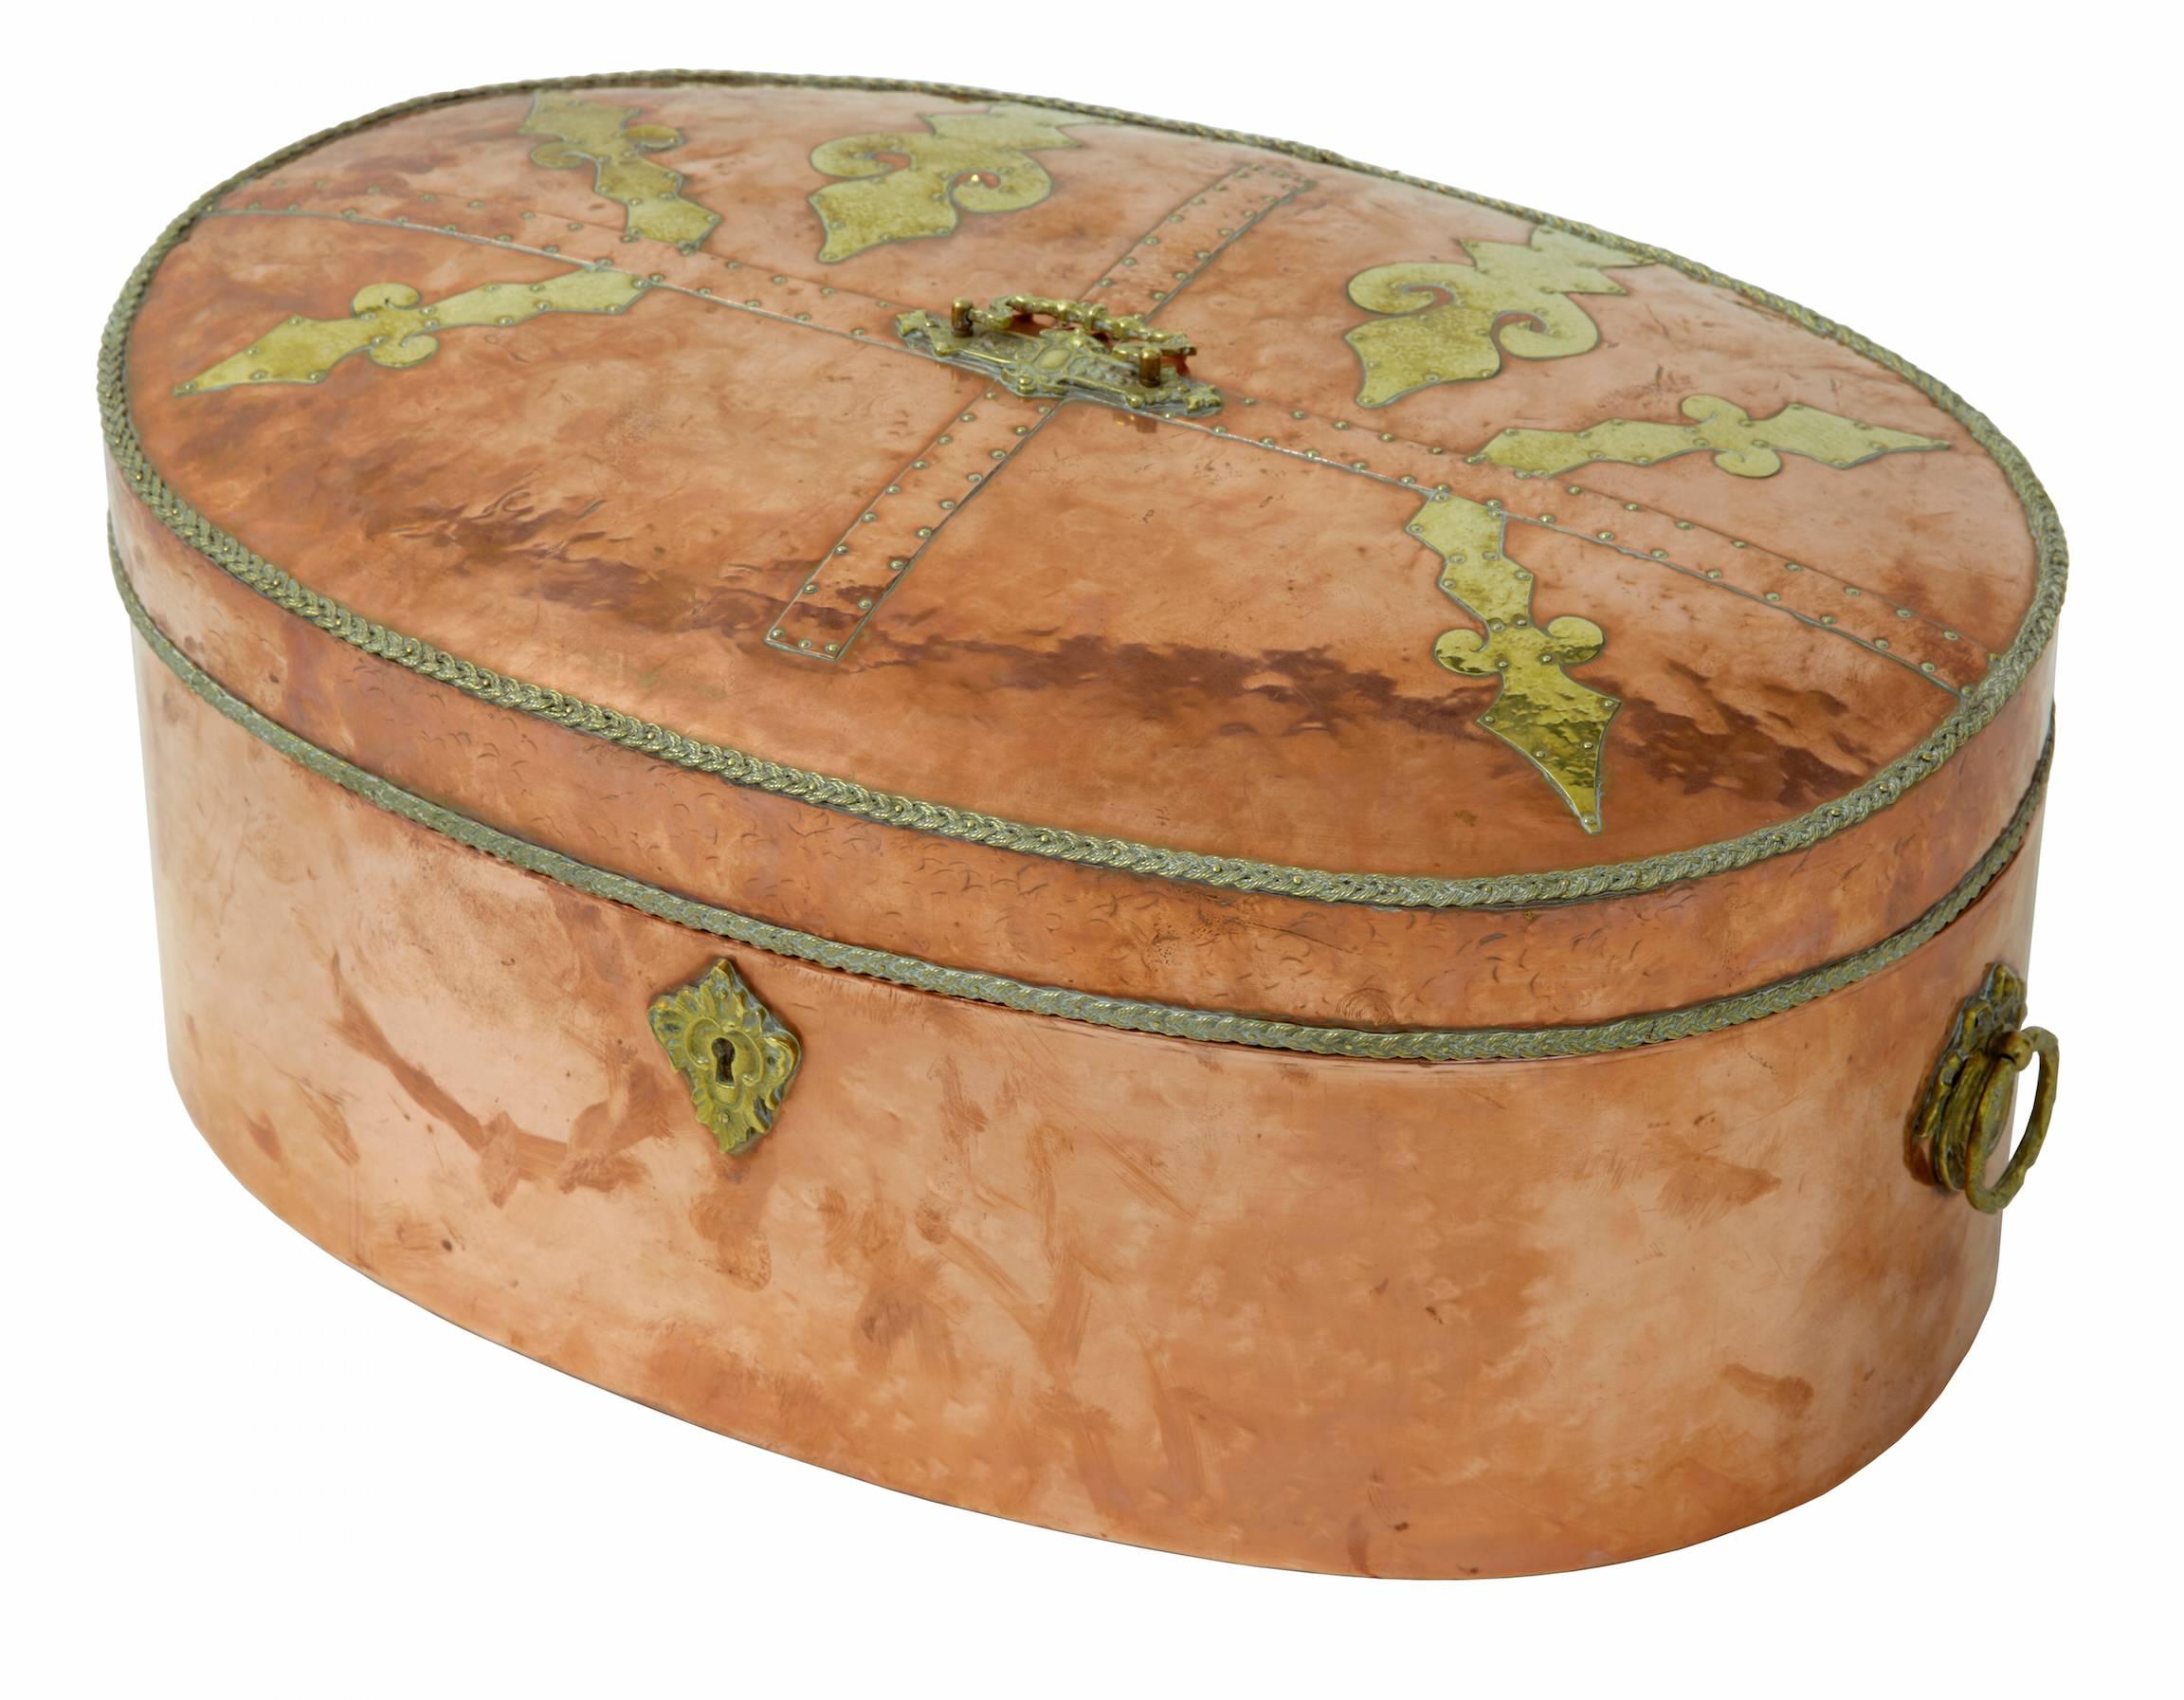 Early 20th century Arts and Crafts copper and brass box
Arts and crafts hinged box, circa 1910
Hand shaped box adorned with brass detailing on the handles, hinges, lid and brass rope to the lid edging
Lined with green baize on the